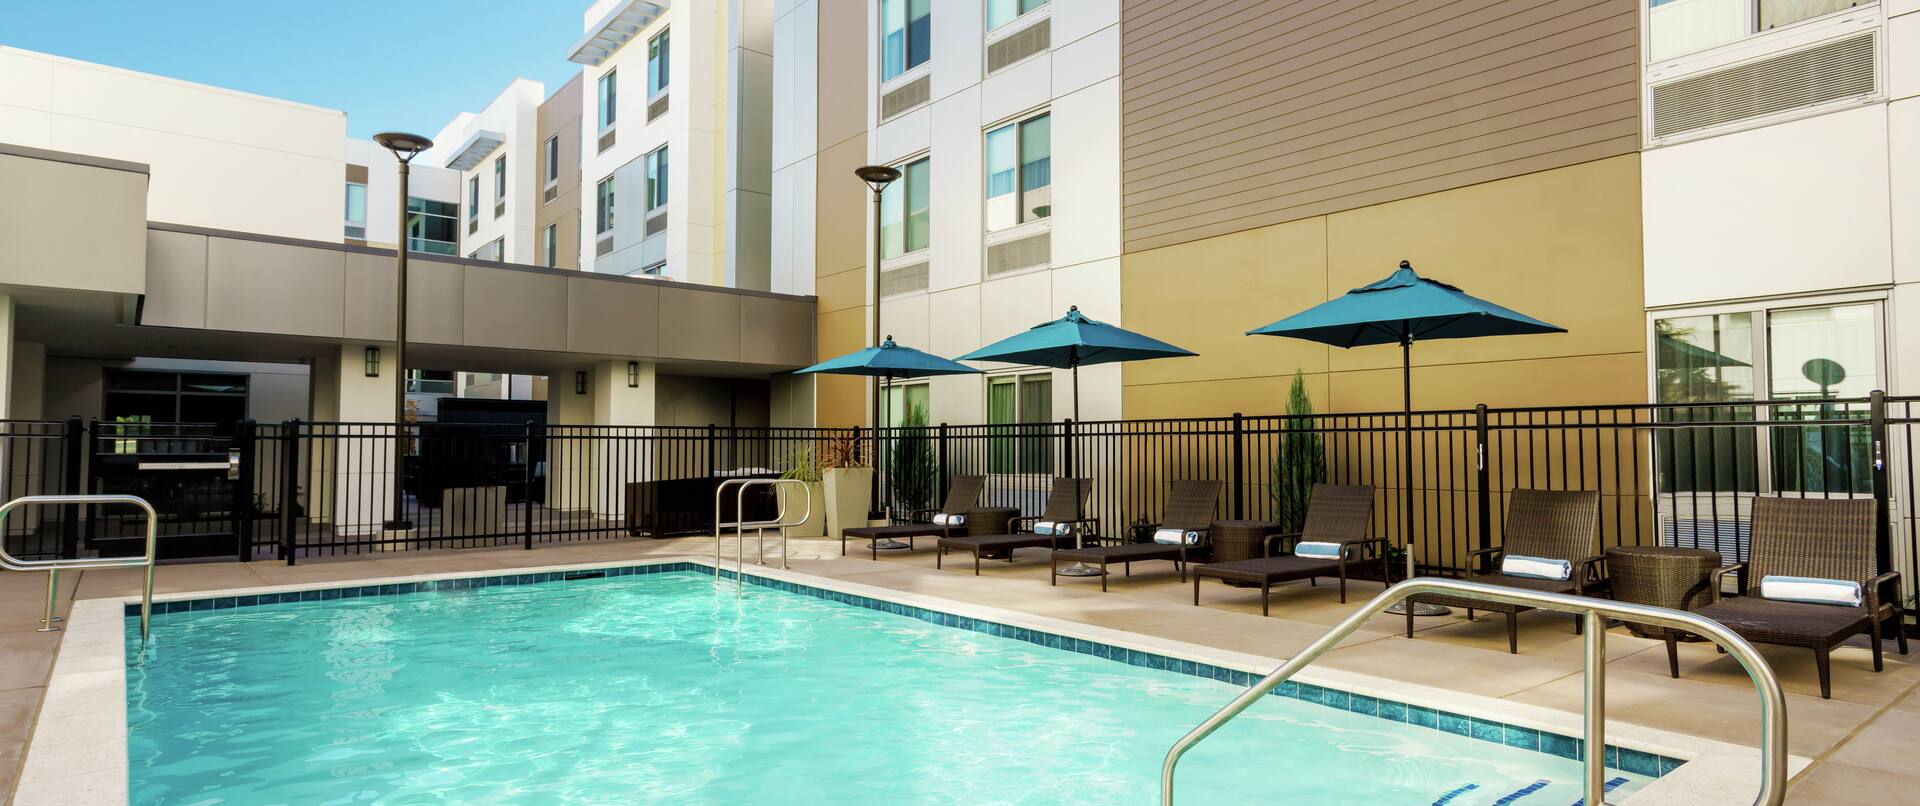 Outdoor Pool with Seating Along Side of Hotel